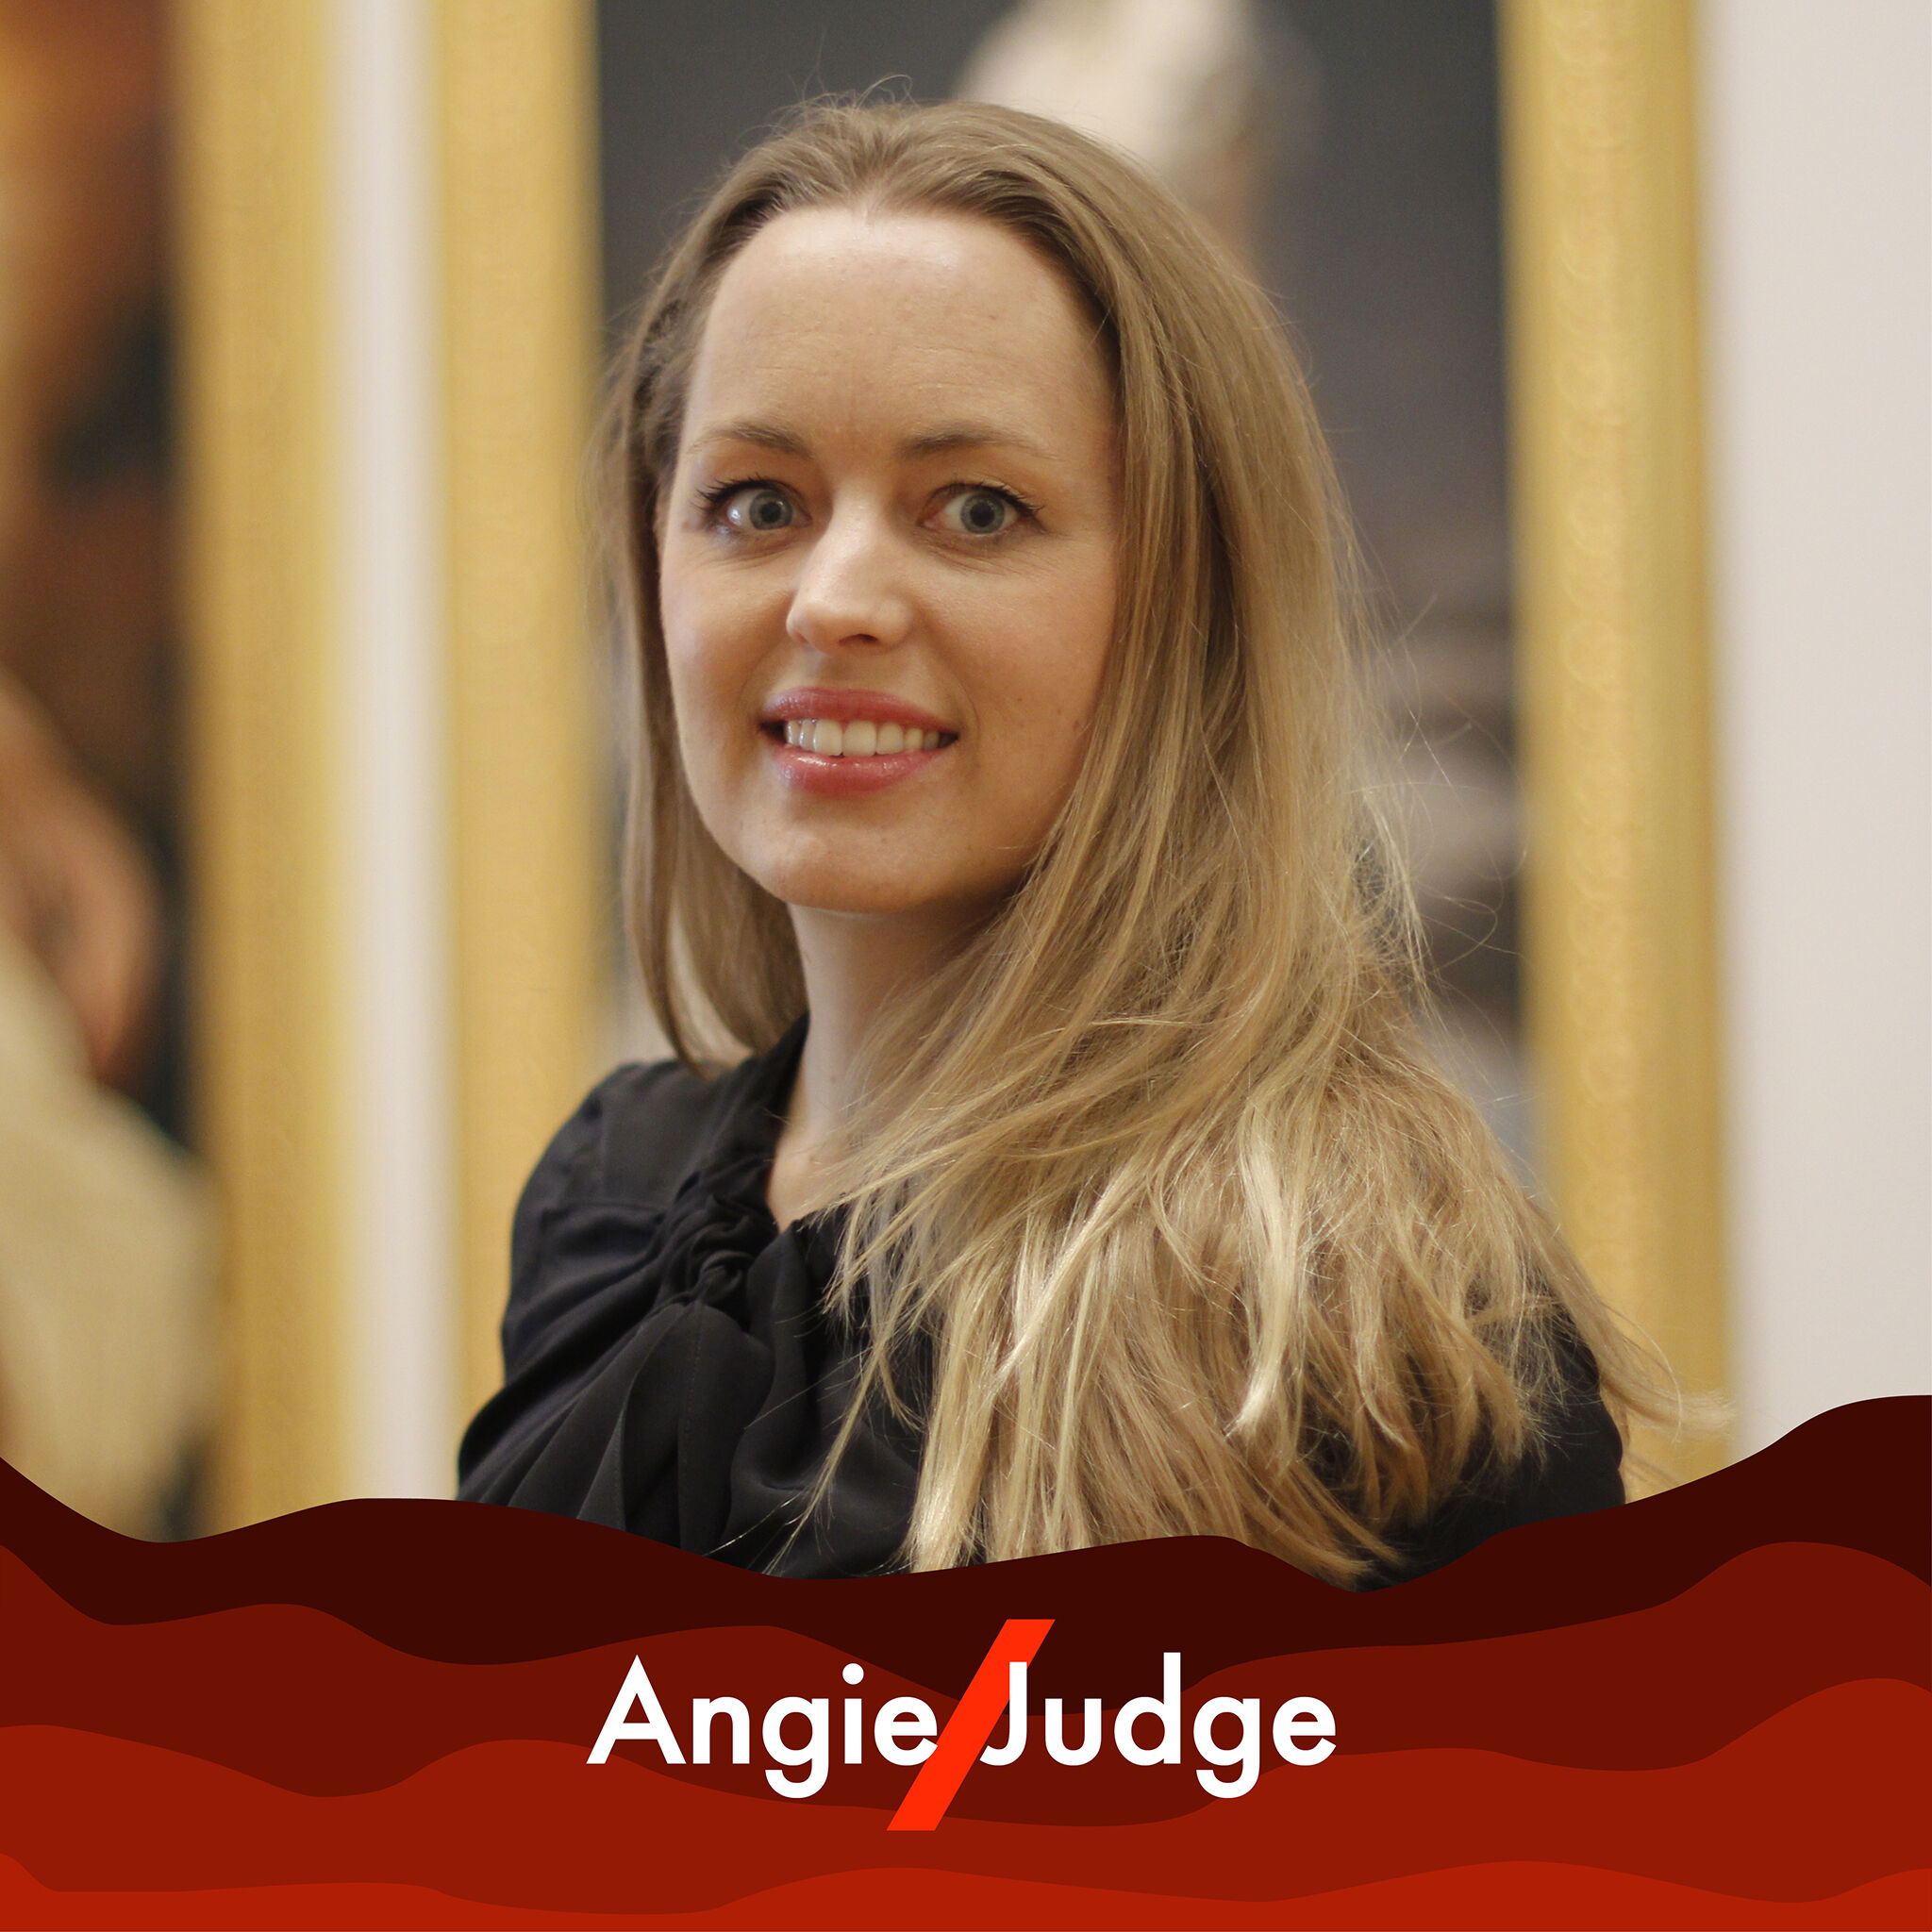 A picture of Angie Judge